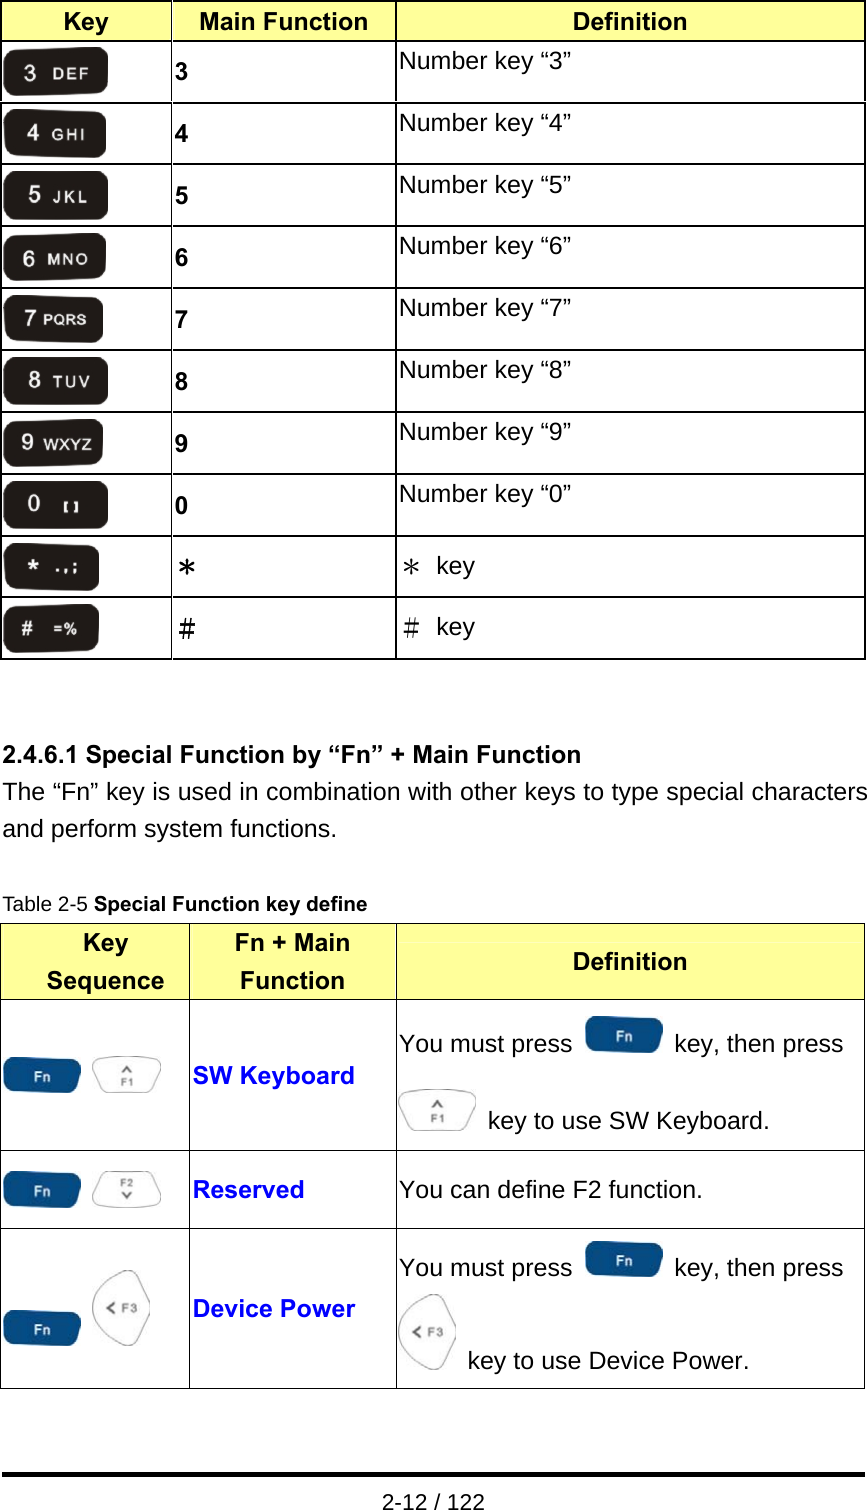  2-12 / 122 Key  Main Function  Definition  3  Number key “3”  4  Number key “4”  5  Number key “5”  6  Number key “6”  7  Number key “7”  8  Number key “8”  9  Number key “9”  0  Number key “0”  ＊ ＊ key  ＃ ＃ key   2.4.6.1 Special Function by “Fn” + Main Function The “Fn” key is used in combination with other keys to type special characters and perform system functions.  Table 2-5 Special Function key define Key Sequence Fn + Main Function  Definition   SW Keyboard You must press   key, then press   key to use SW Keyboard.   Reserved  You can define F2 function.   Device Power You must press   key, then press   key to use Device Power. 